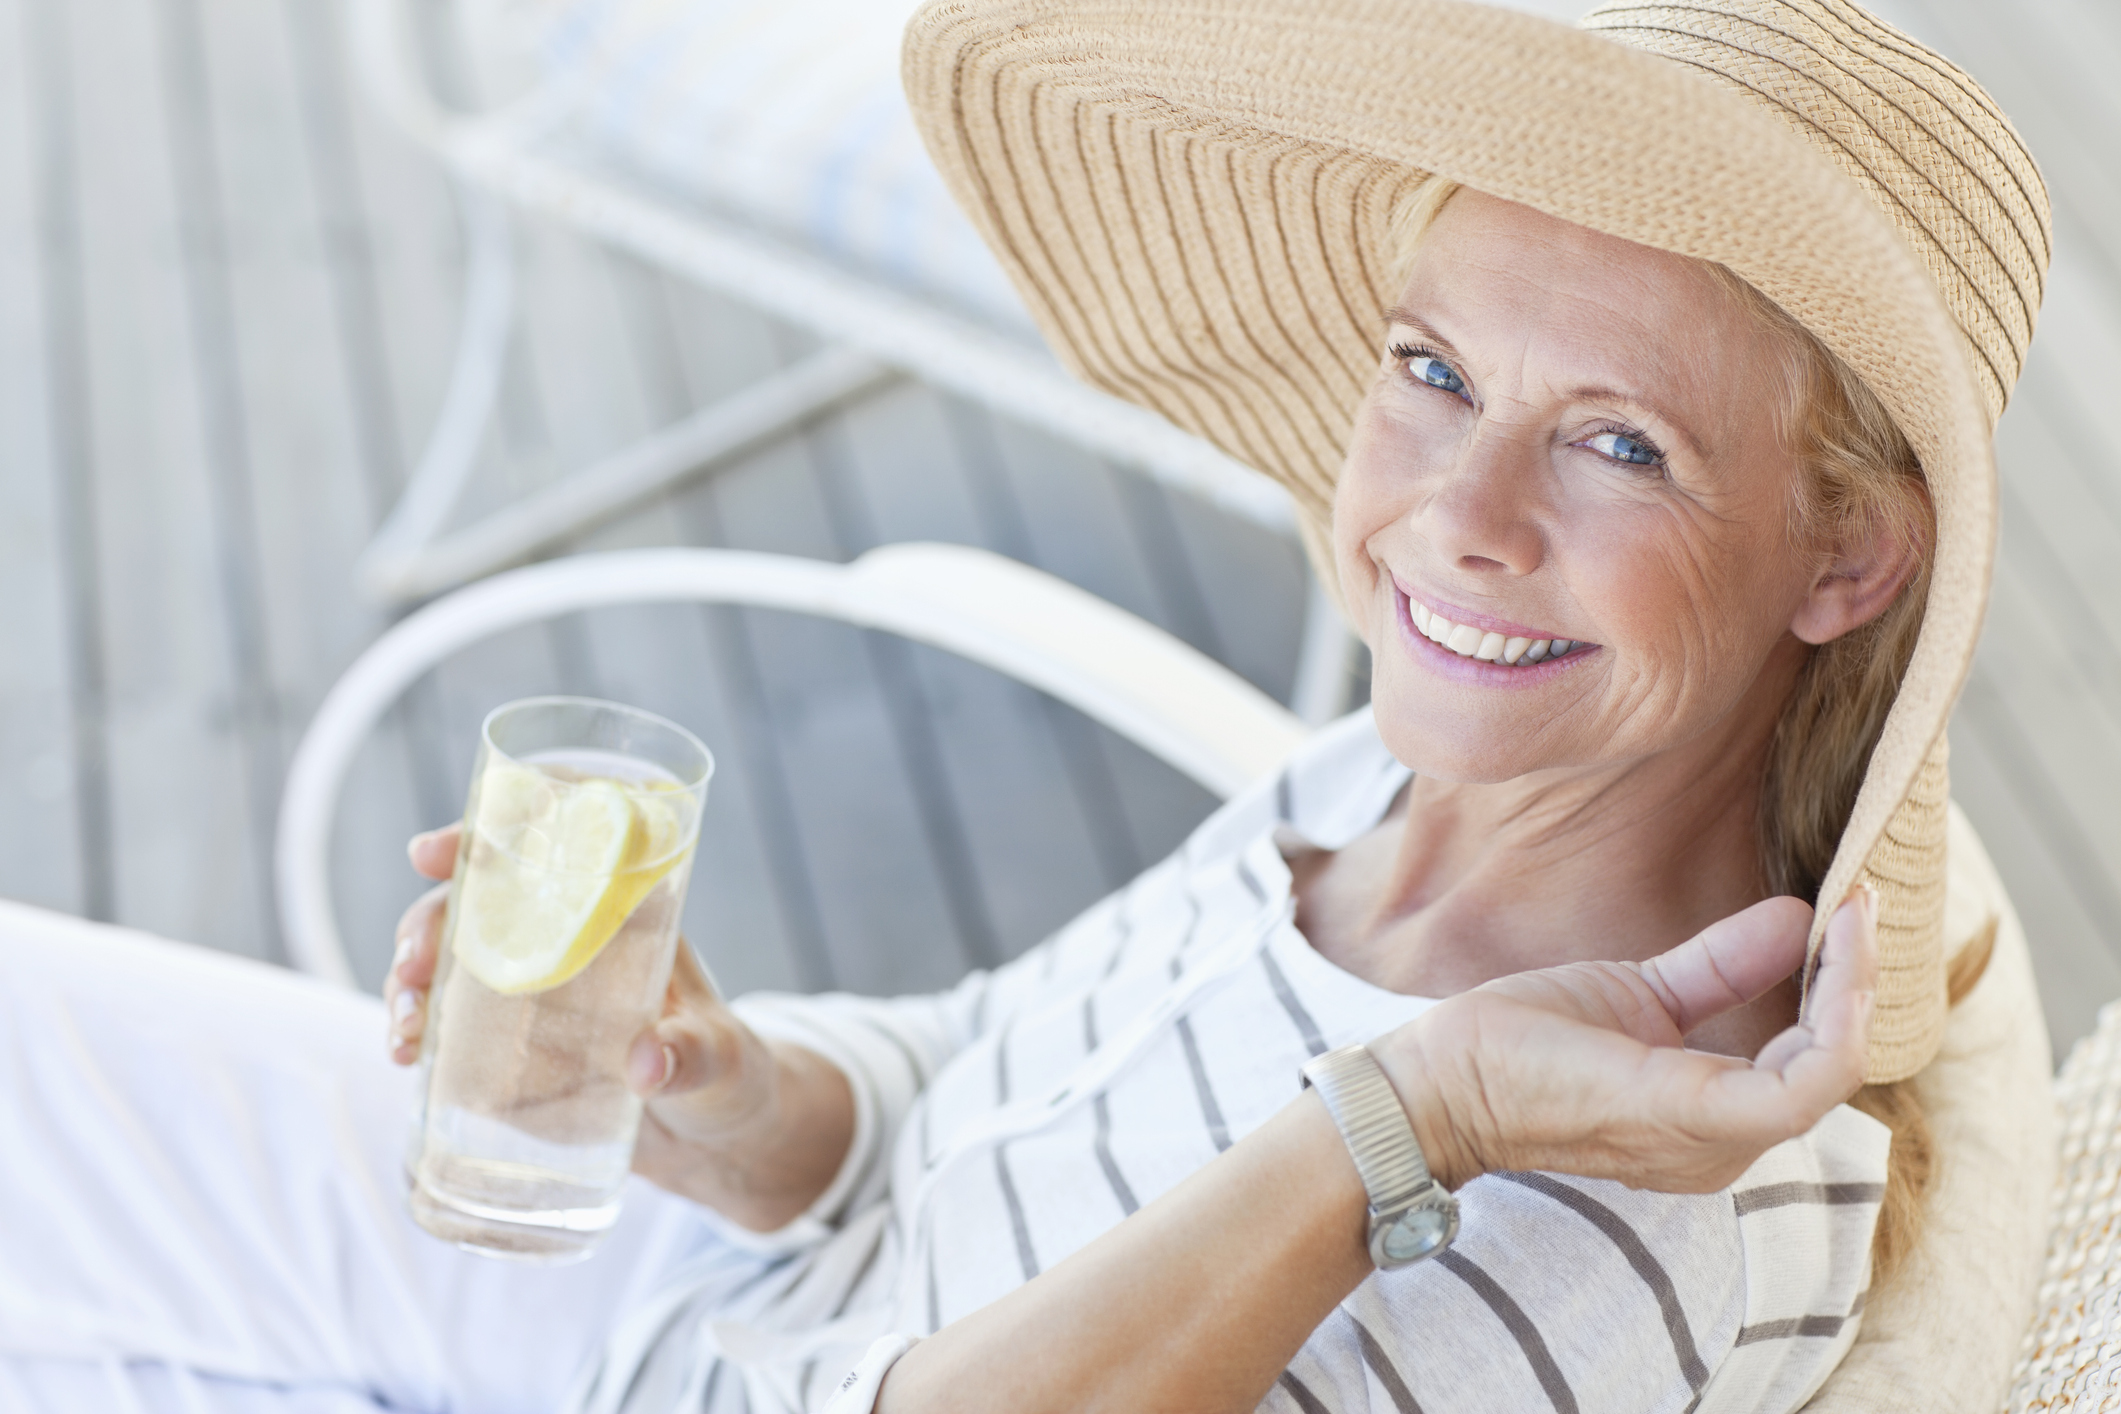 One more reason for seniors to stay cool: Neurodegeneration